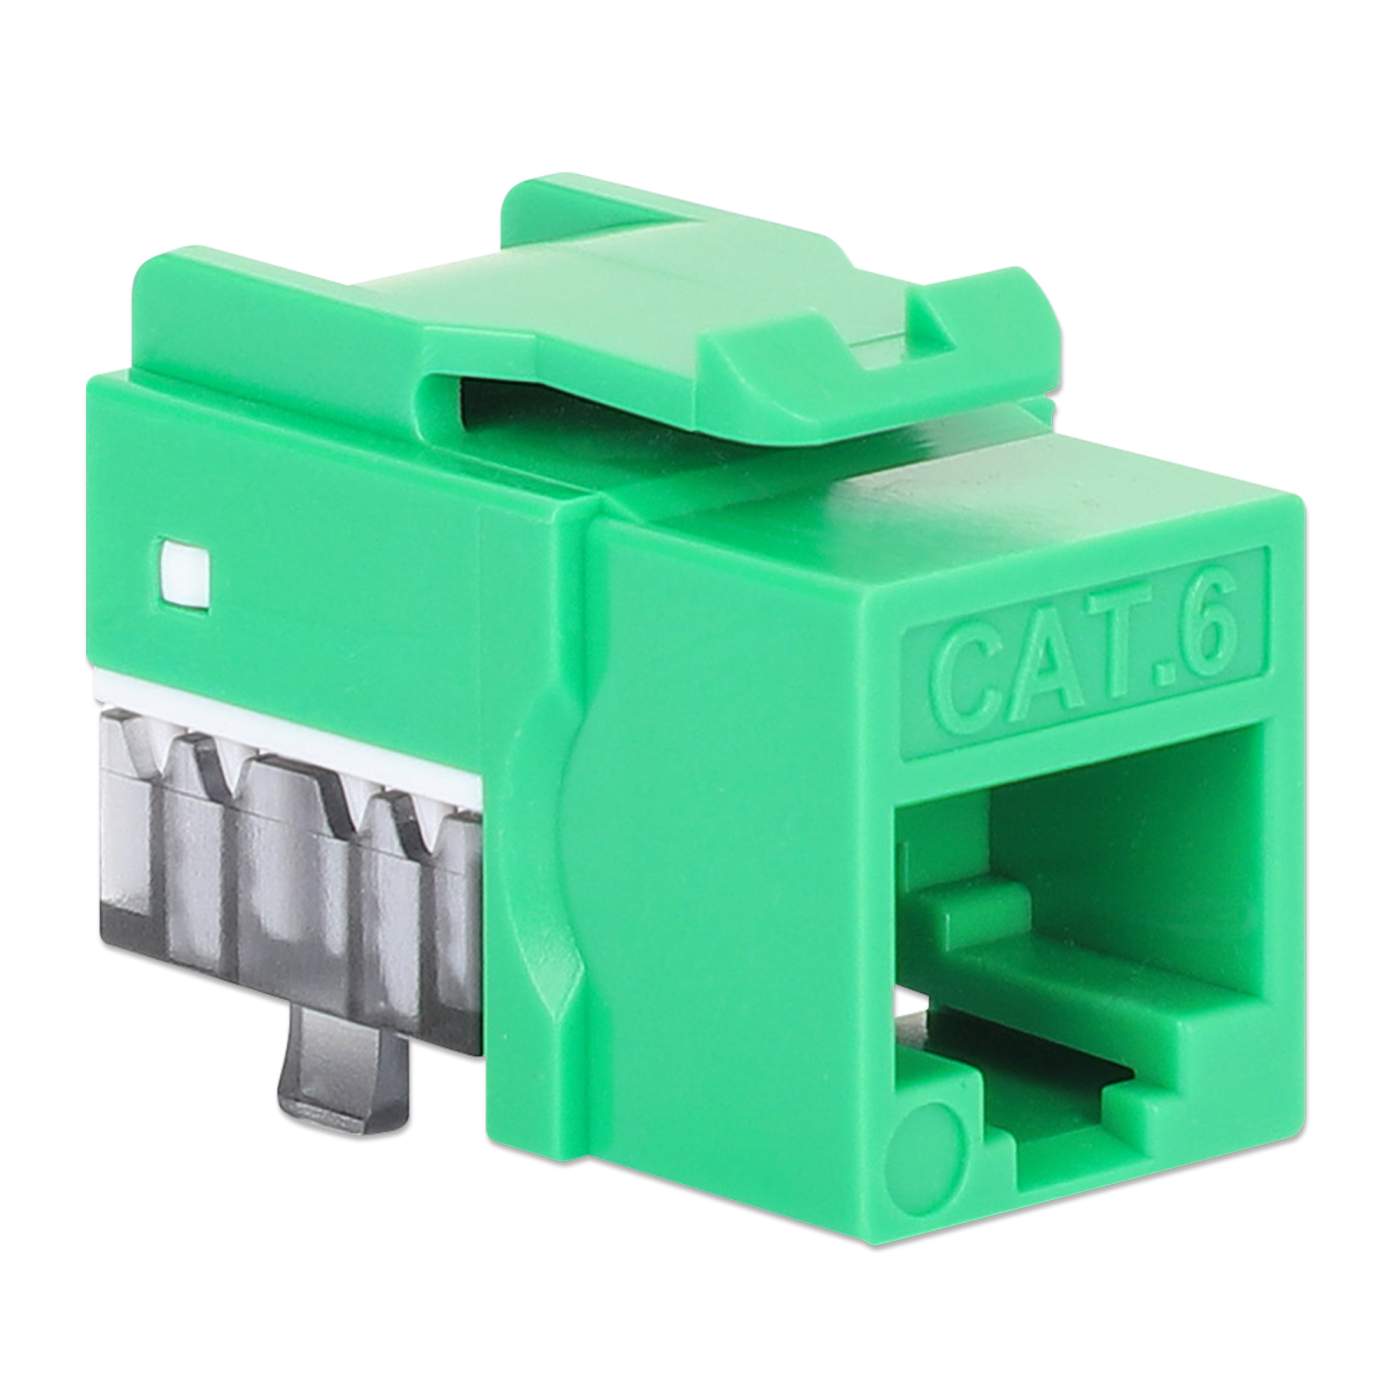 Cat6 Slim Keystone Jack with Punch-Down Stand, Green, 25-Pack Image 3